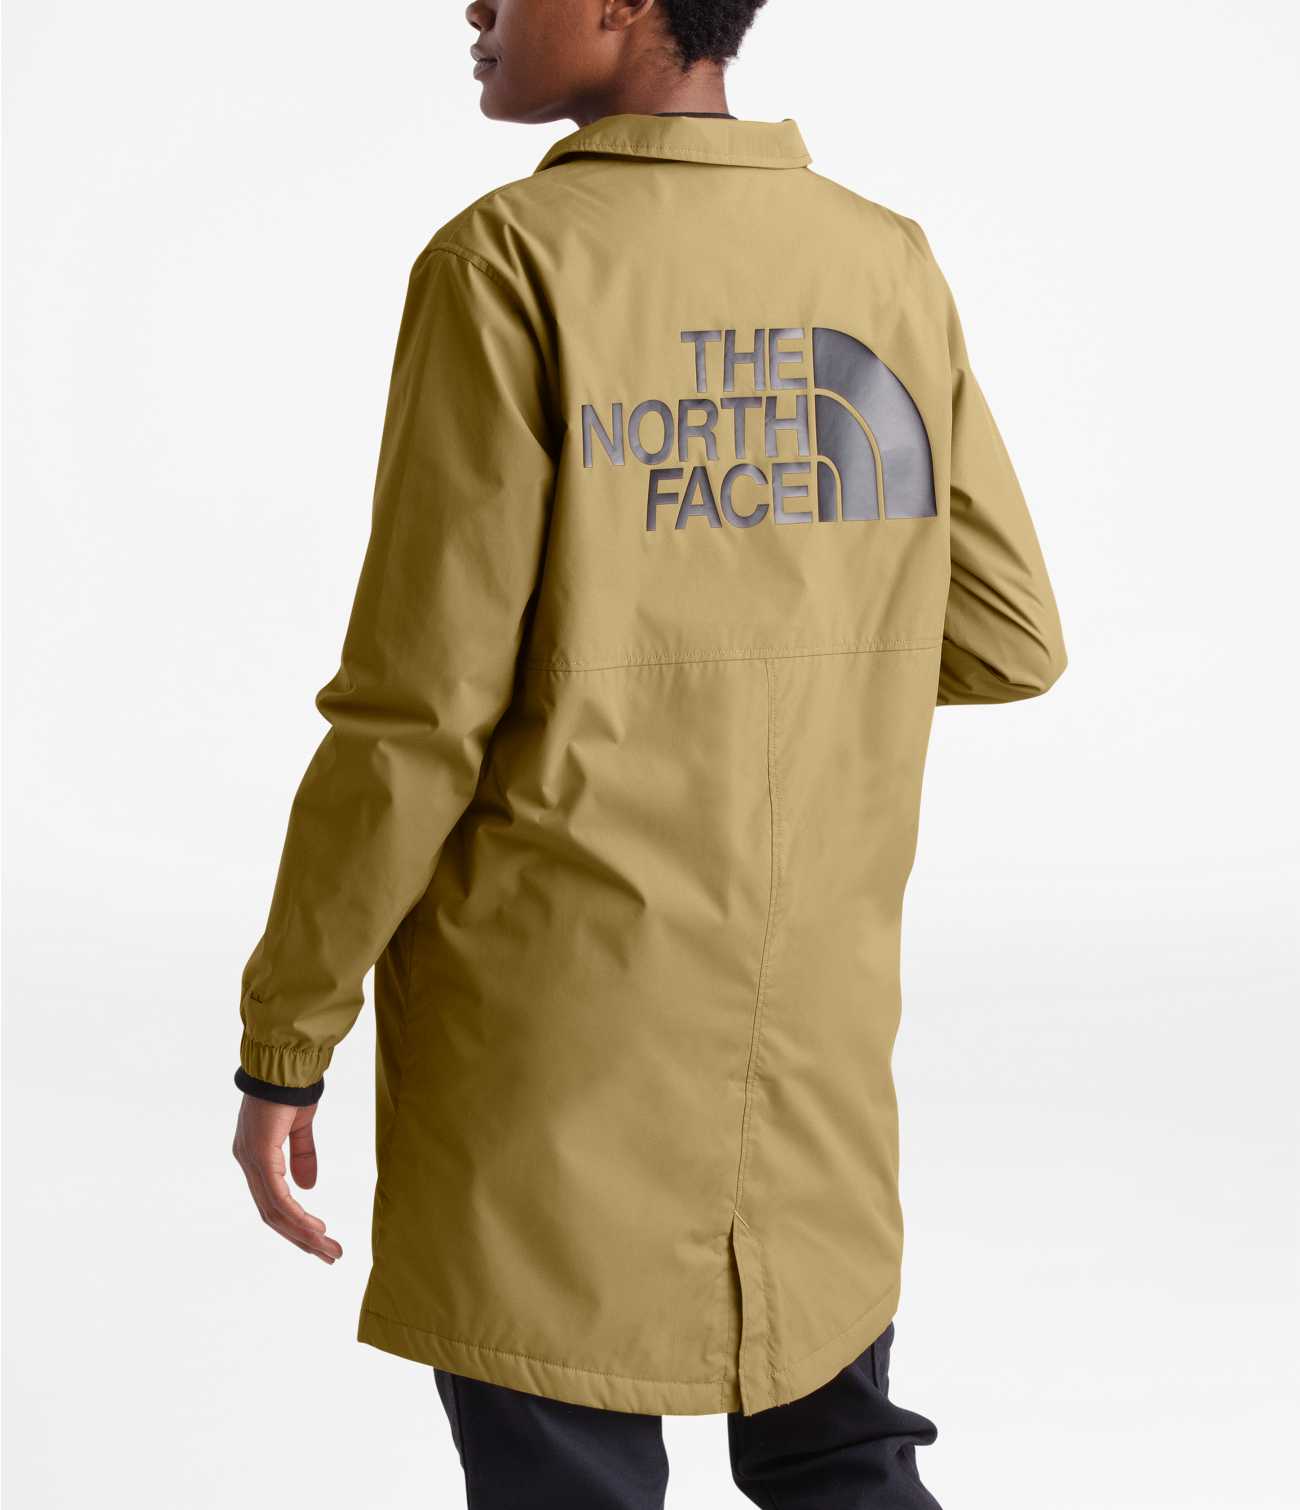 The North Face Renewed - WOMEN'S TELEGRAPHIC COACHES JACKET